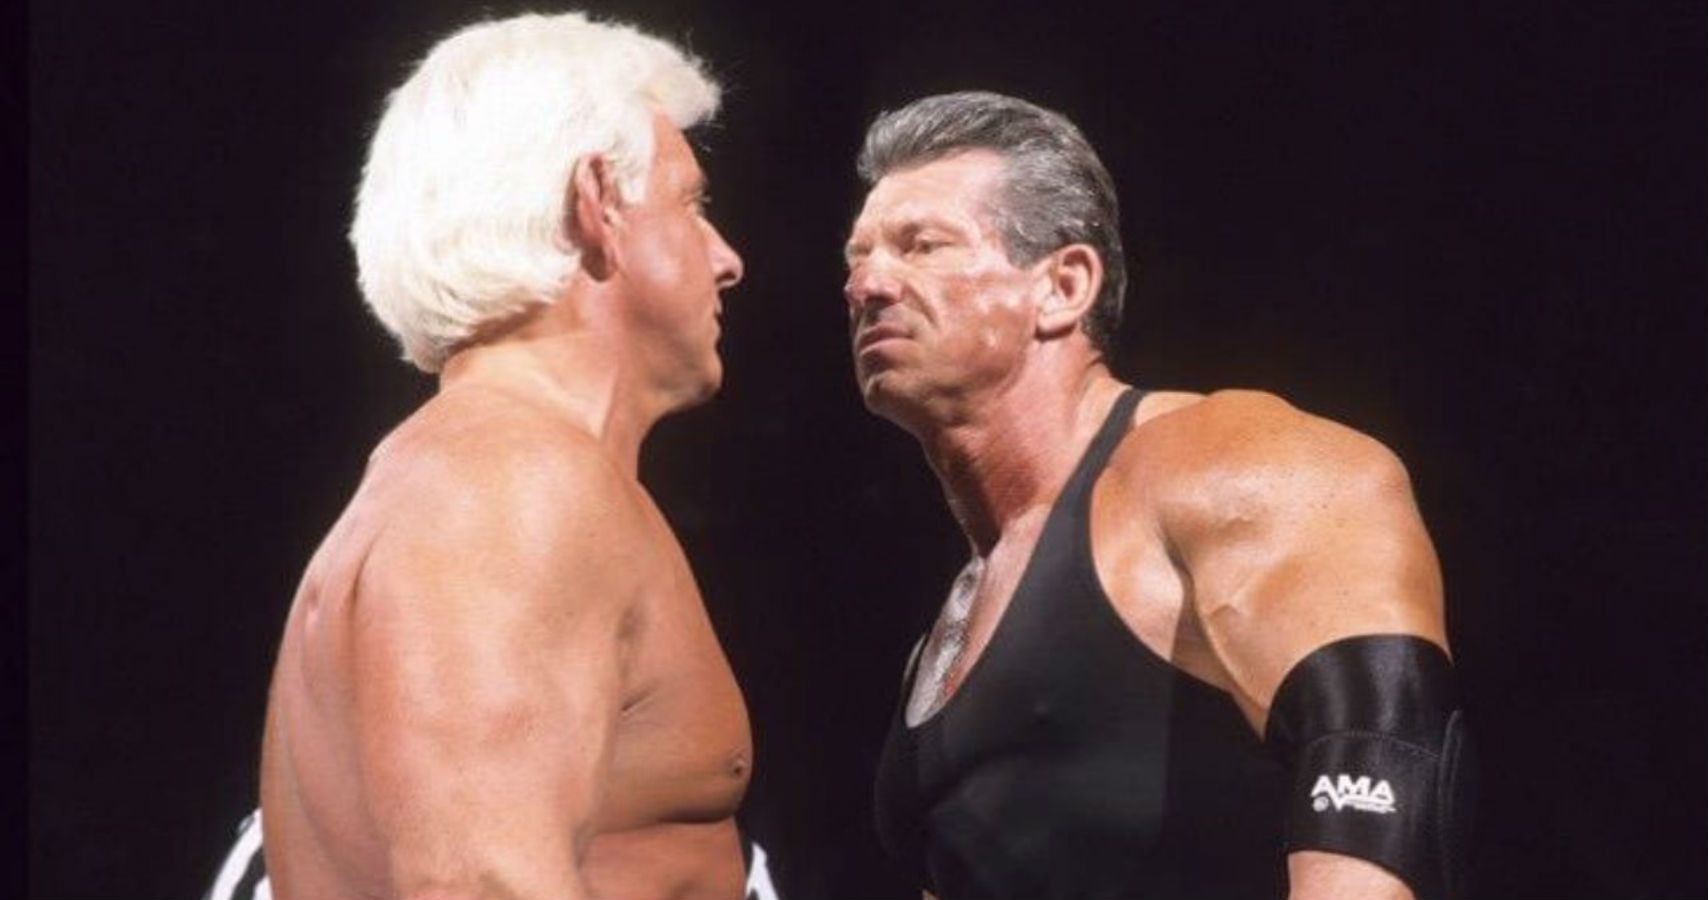 Ric Flair Reveals What A Teary Vince McMahon Said Their 2002 Match 